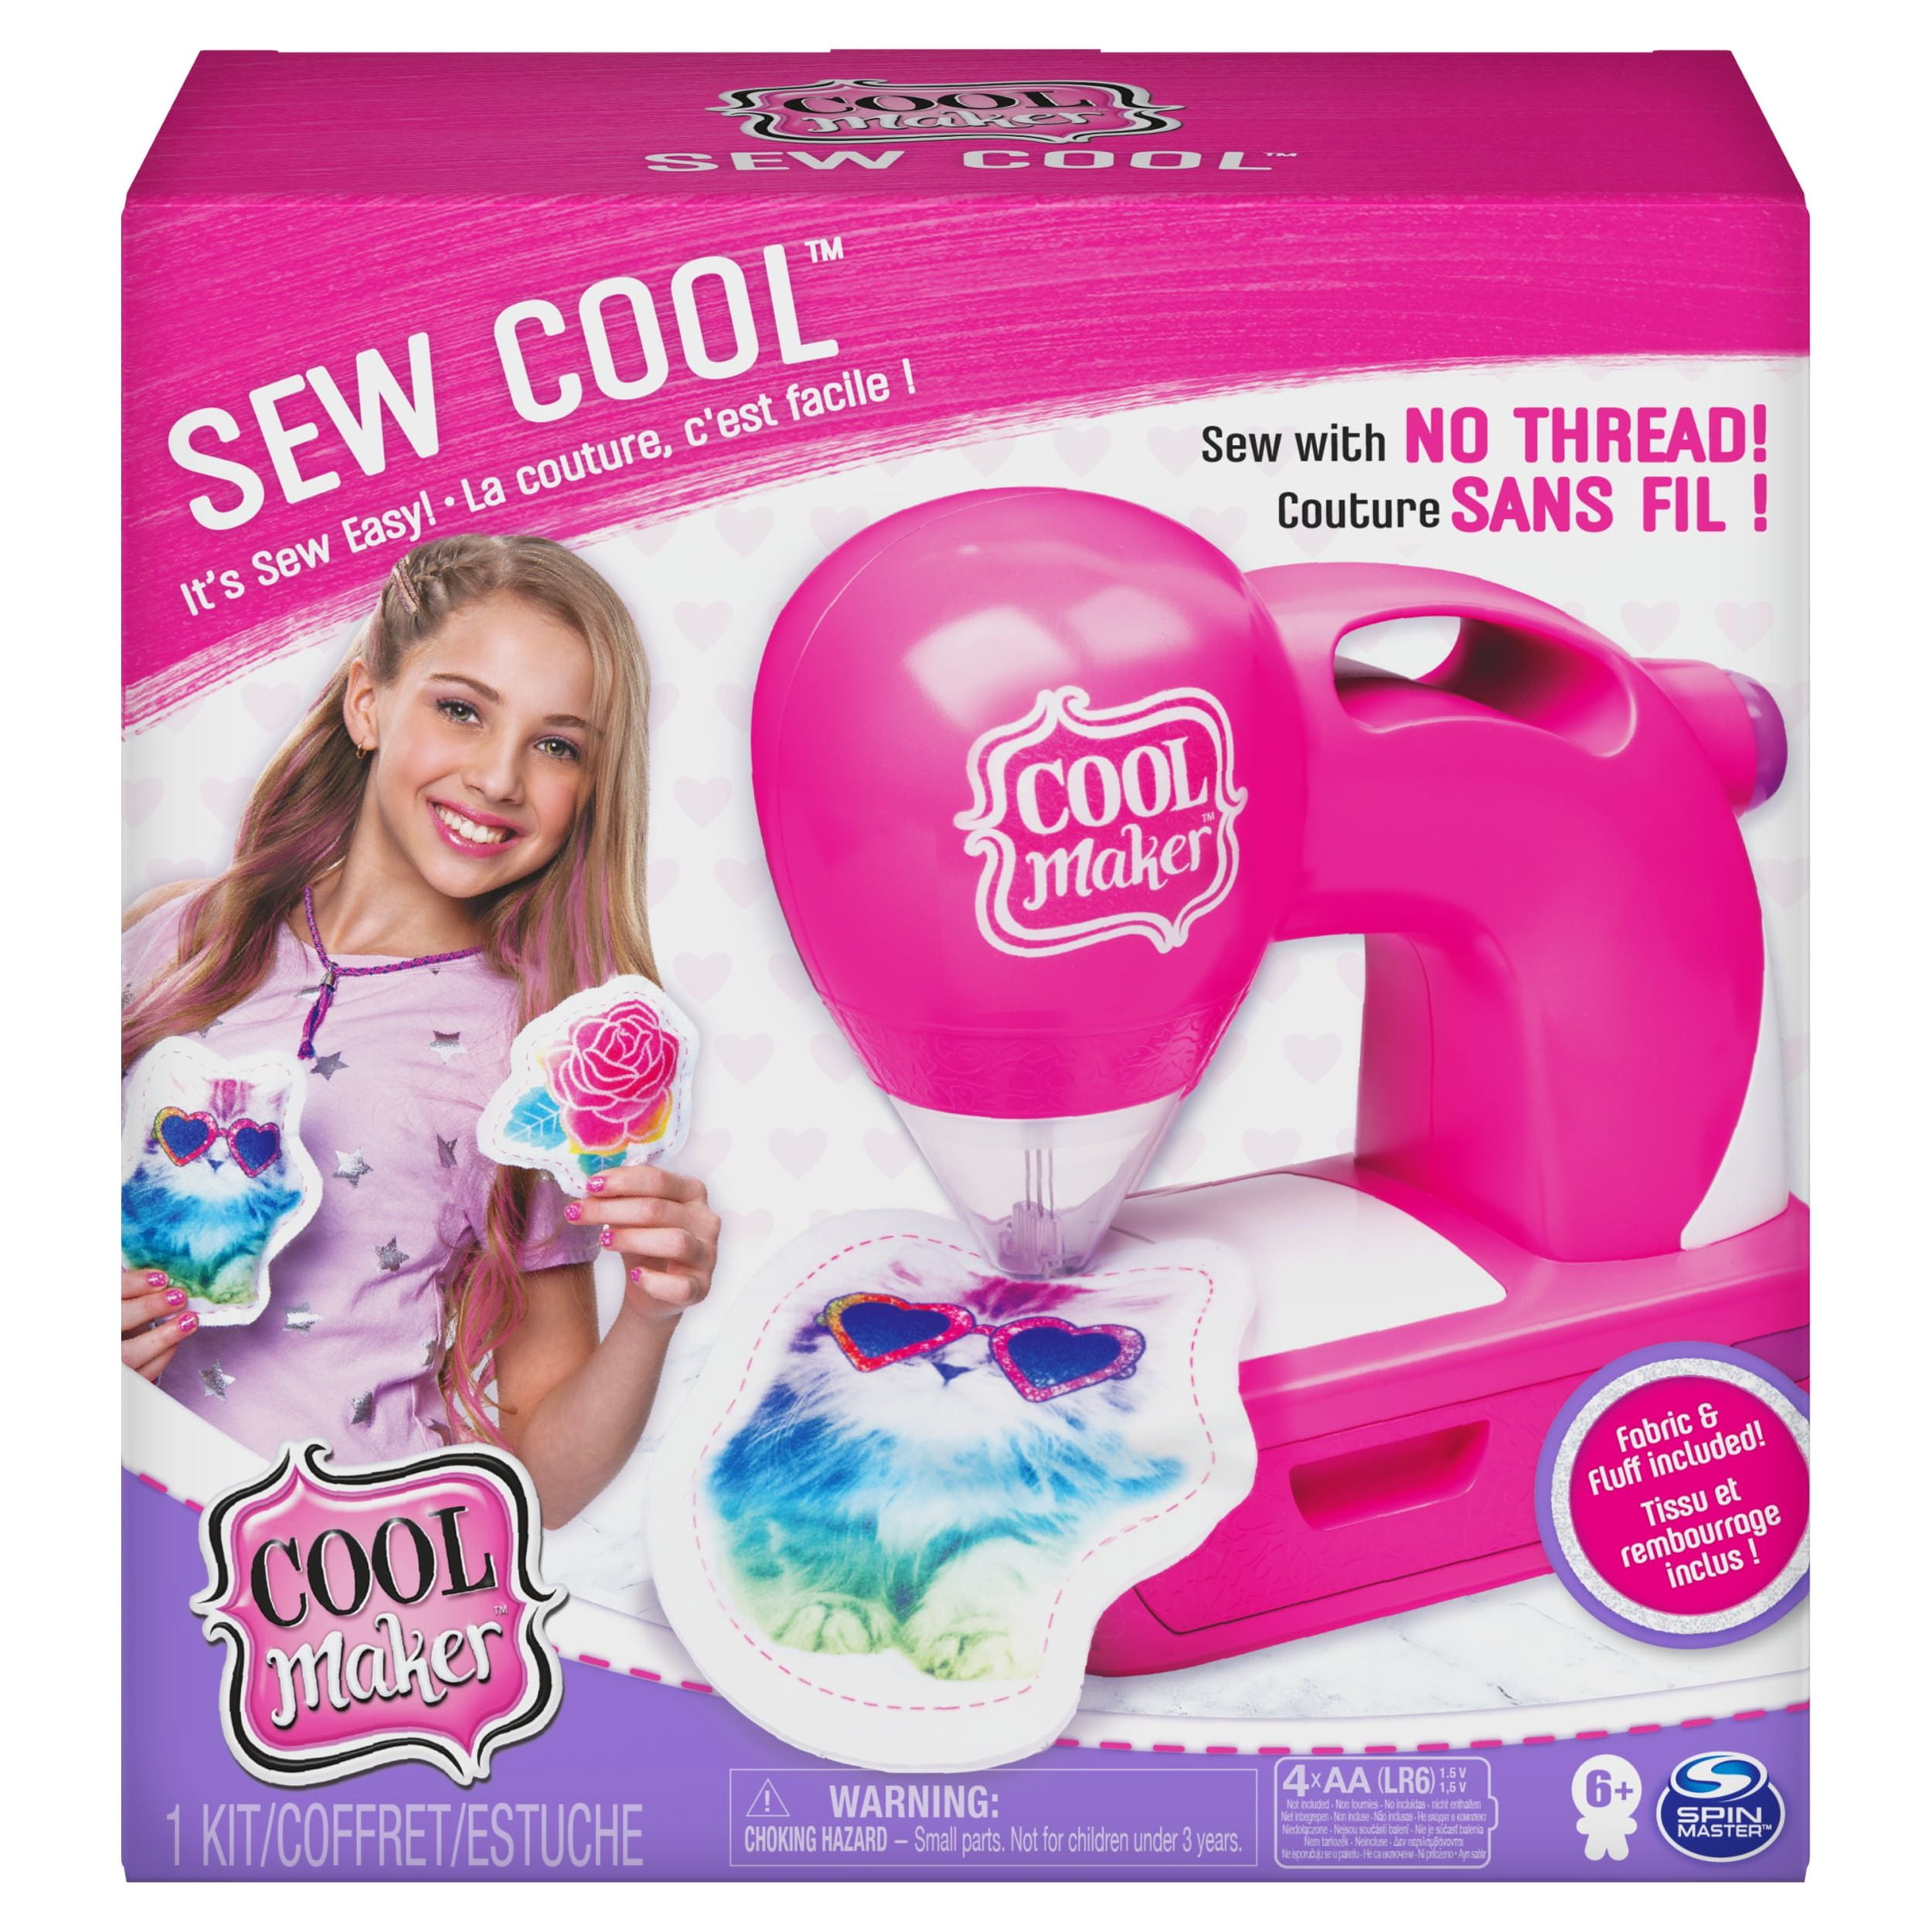 Sew Cool Kids Sewing Machine Review 